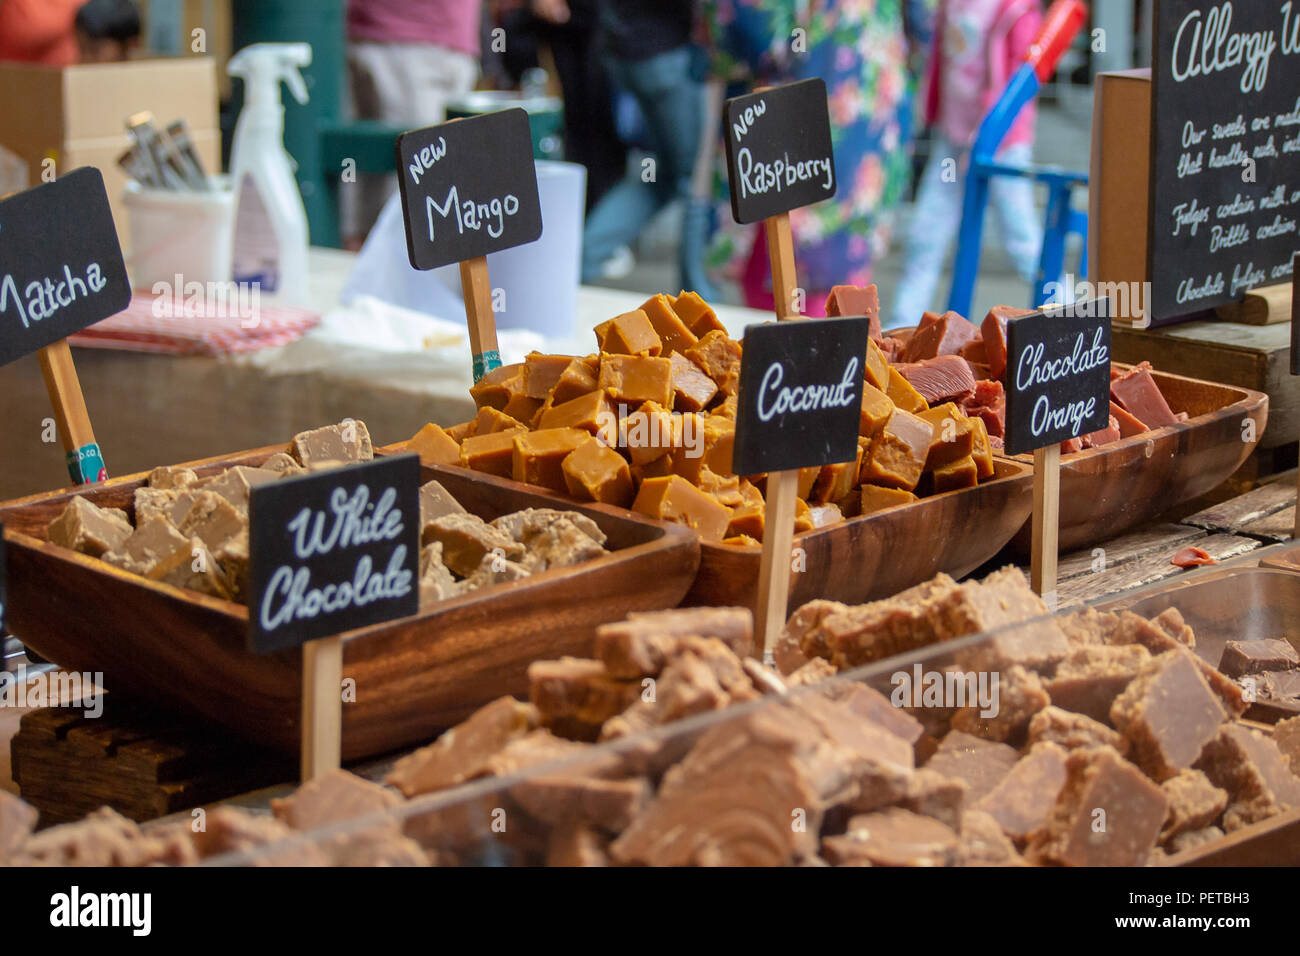 Traditional British Fudge on sale at a confectionary stall in London's Borough Market, UK Stock Photo